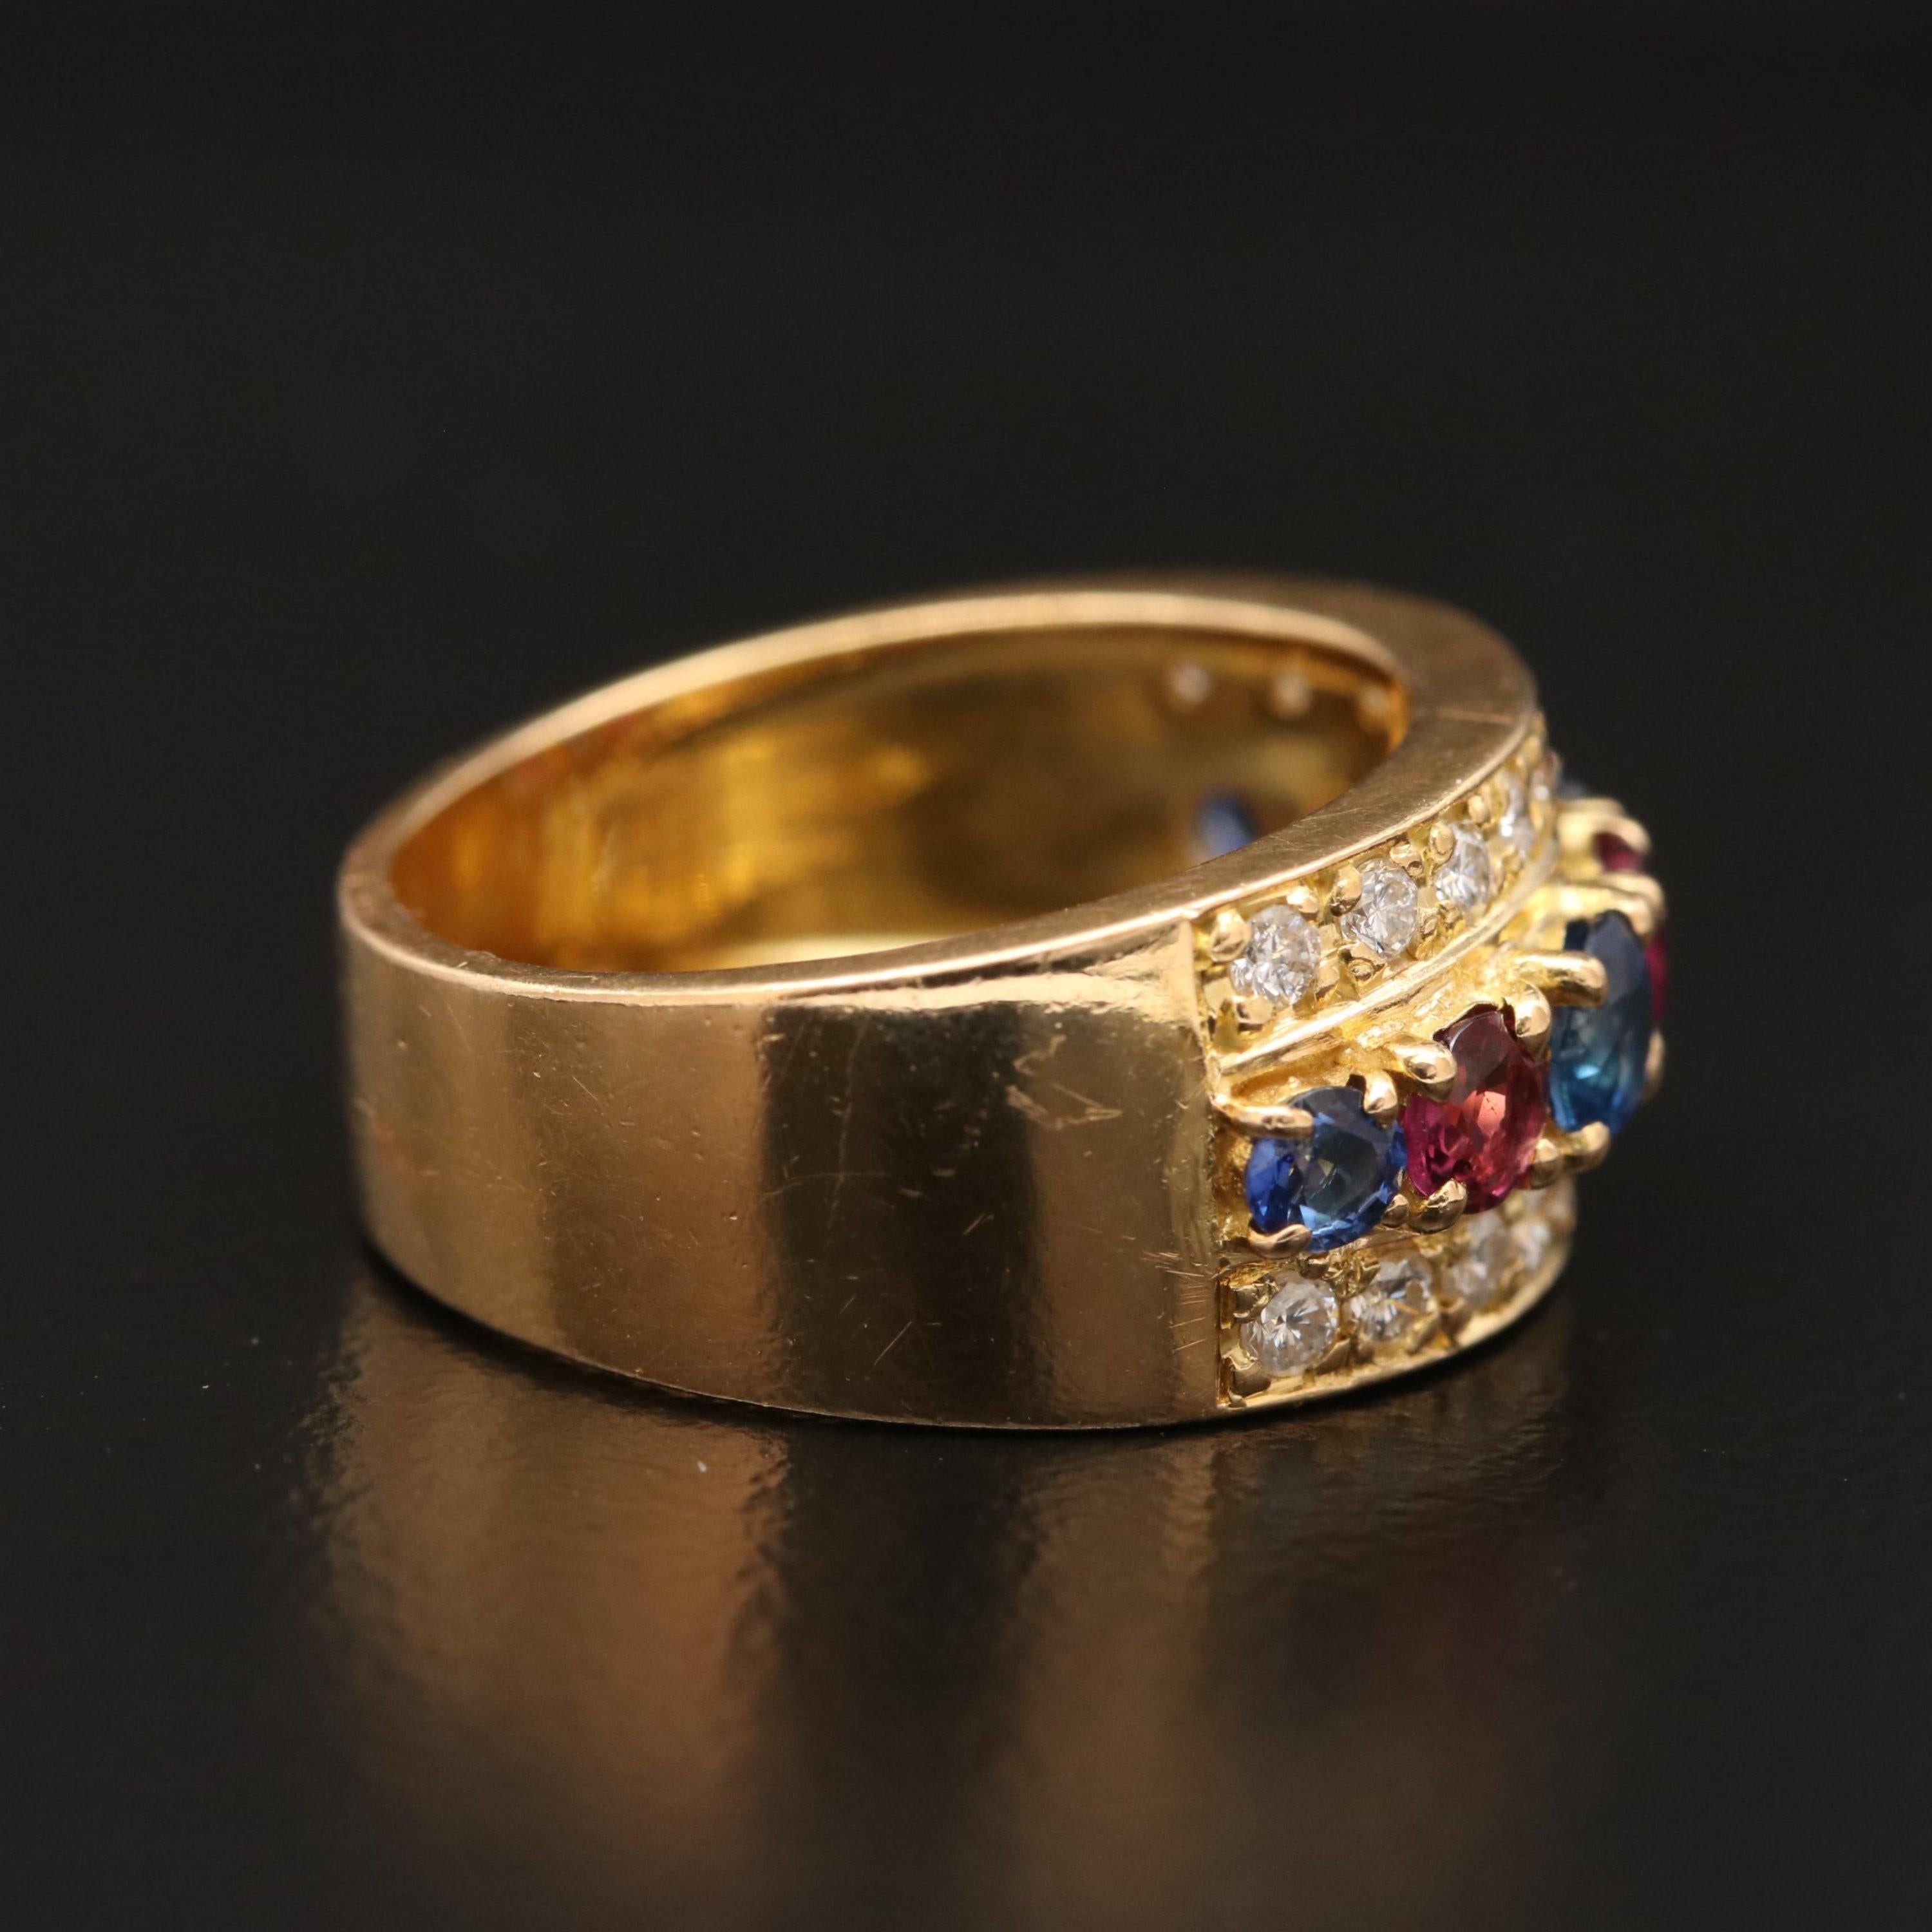 For Sale:  Natural Ruby Sapphire Diamond Engagement Ring Set in 18K Gold, Cocktail Ring 3